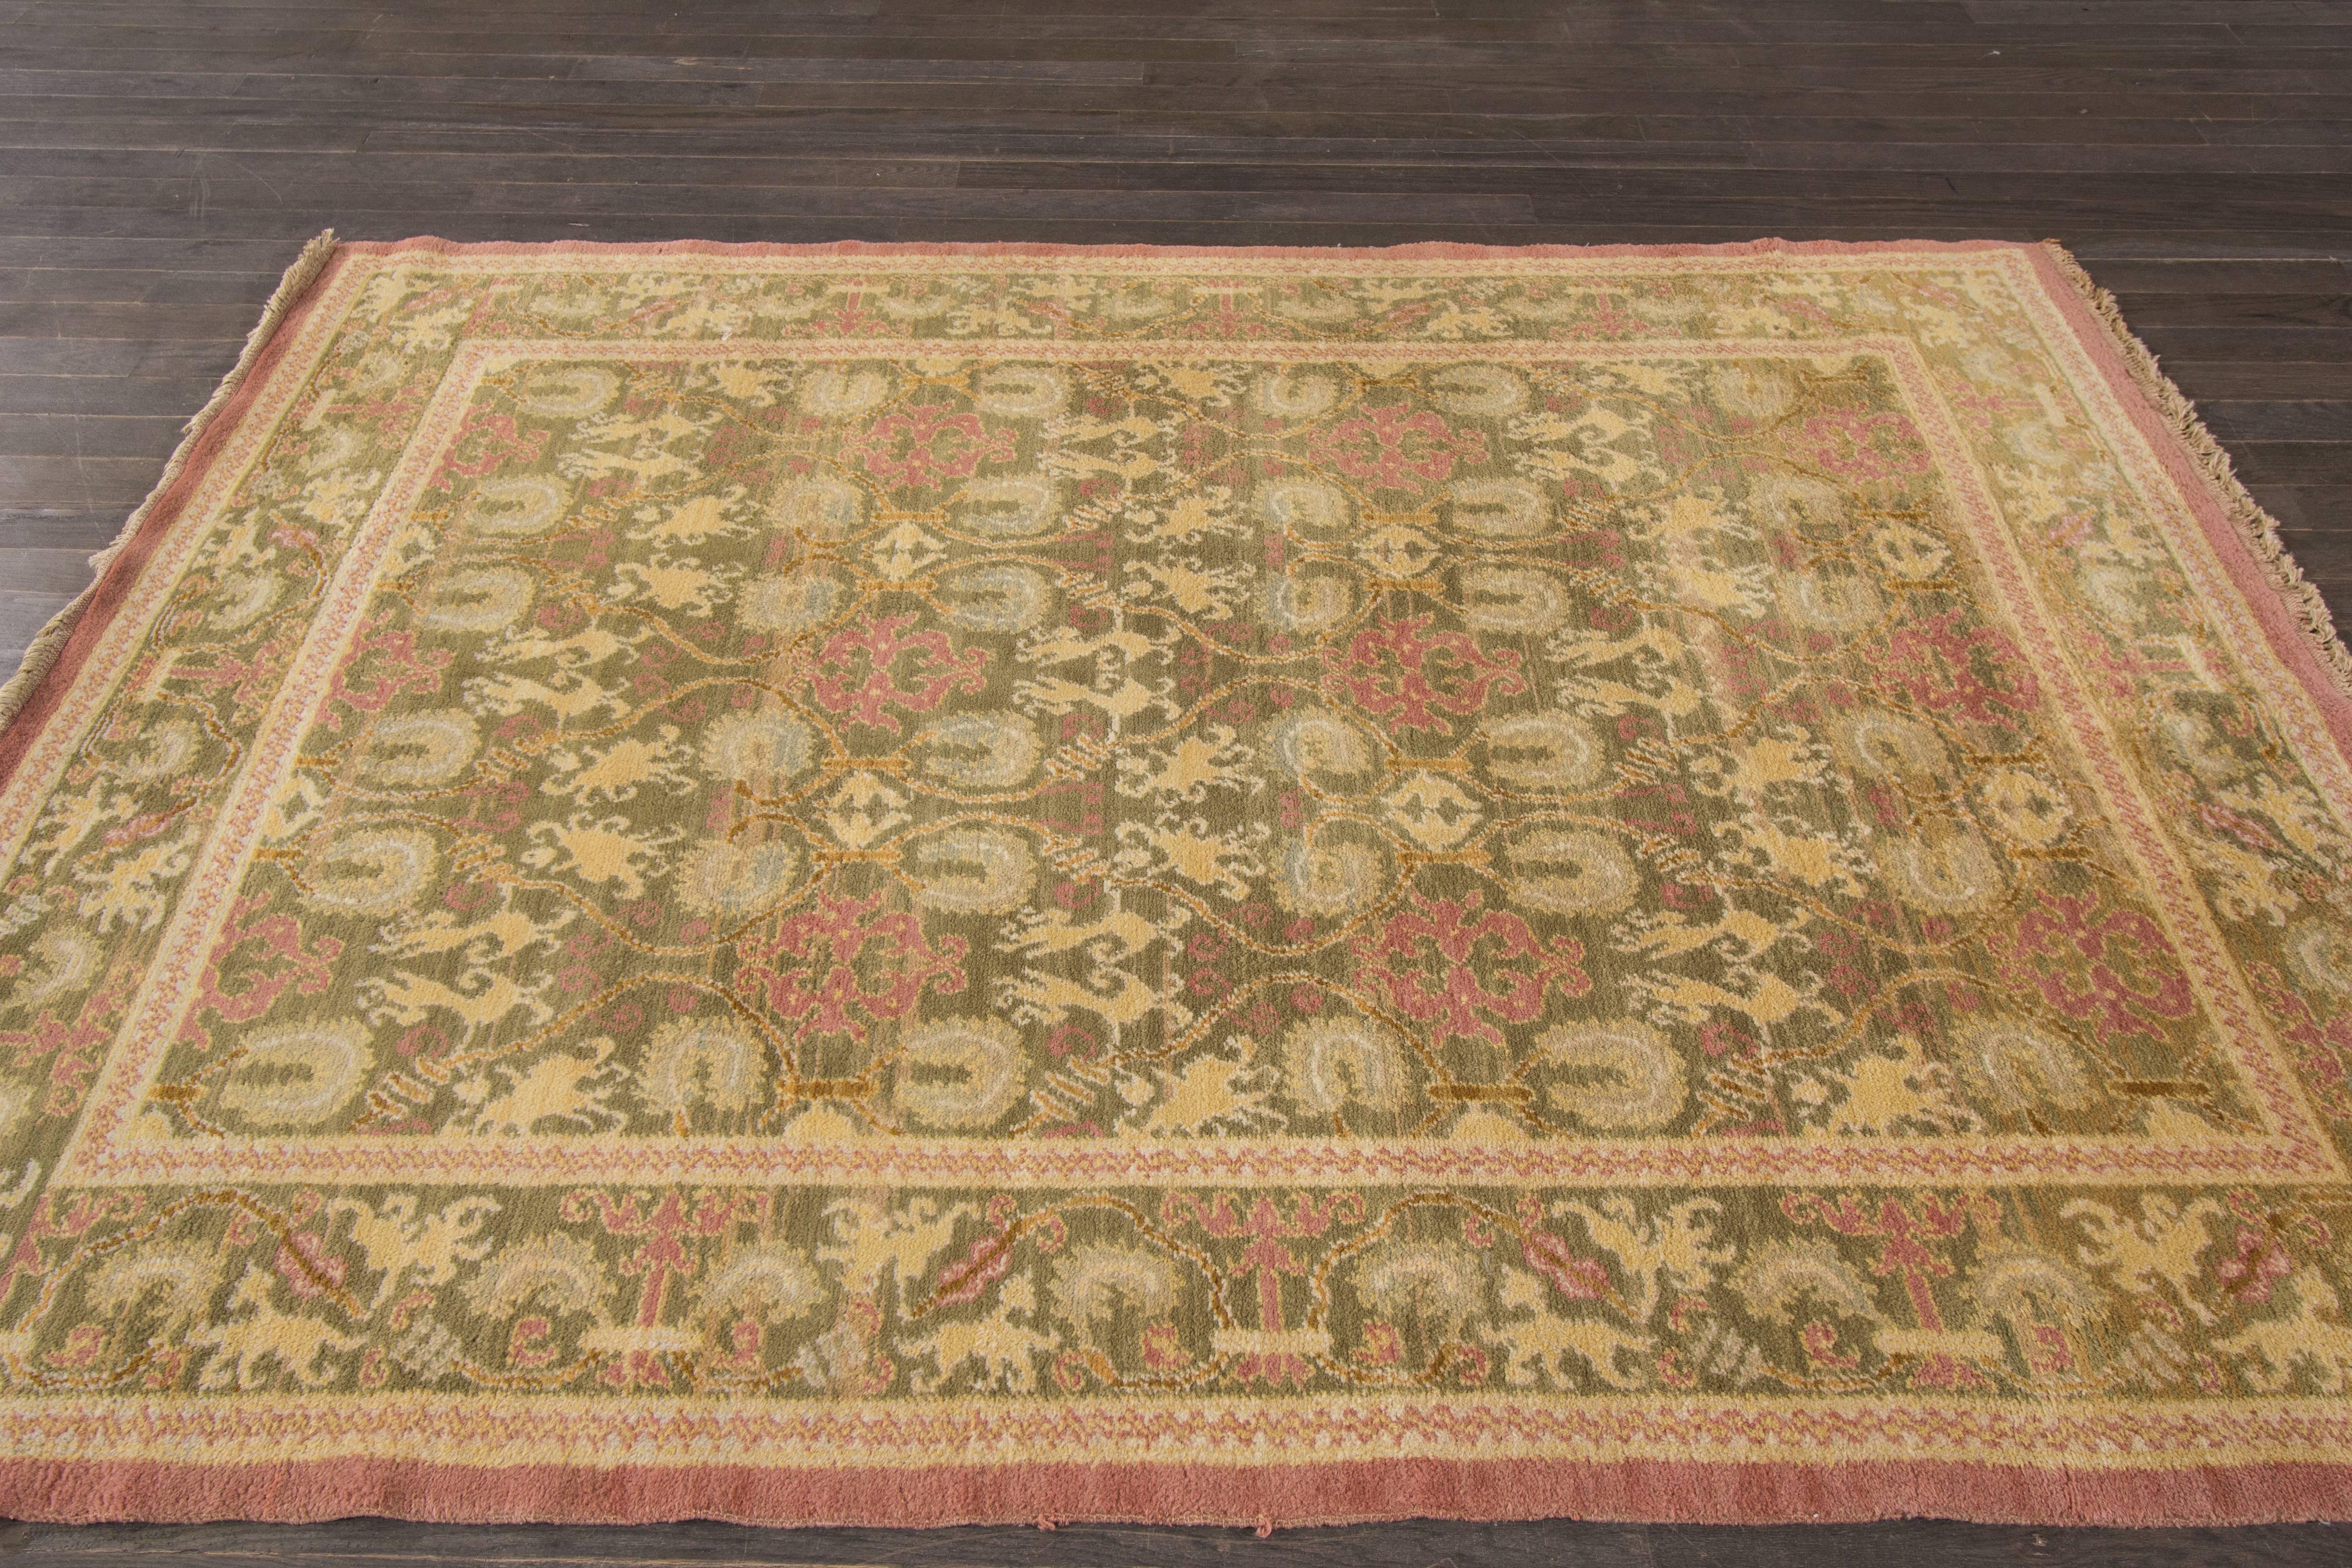 Early 20th Century Antique Spanish Rug